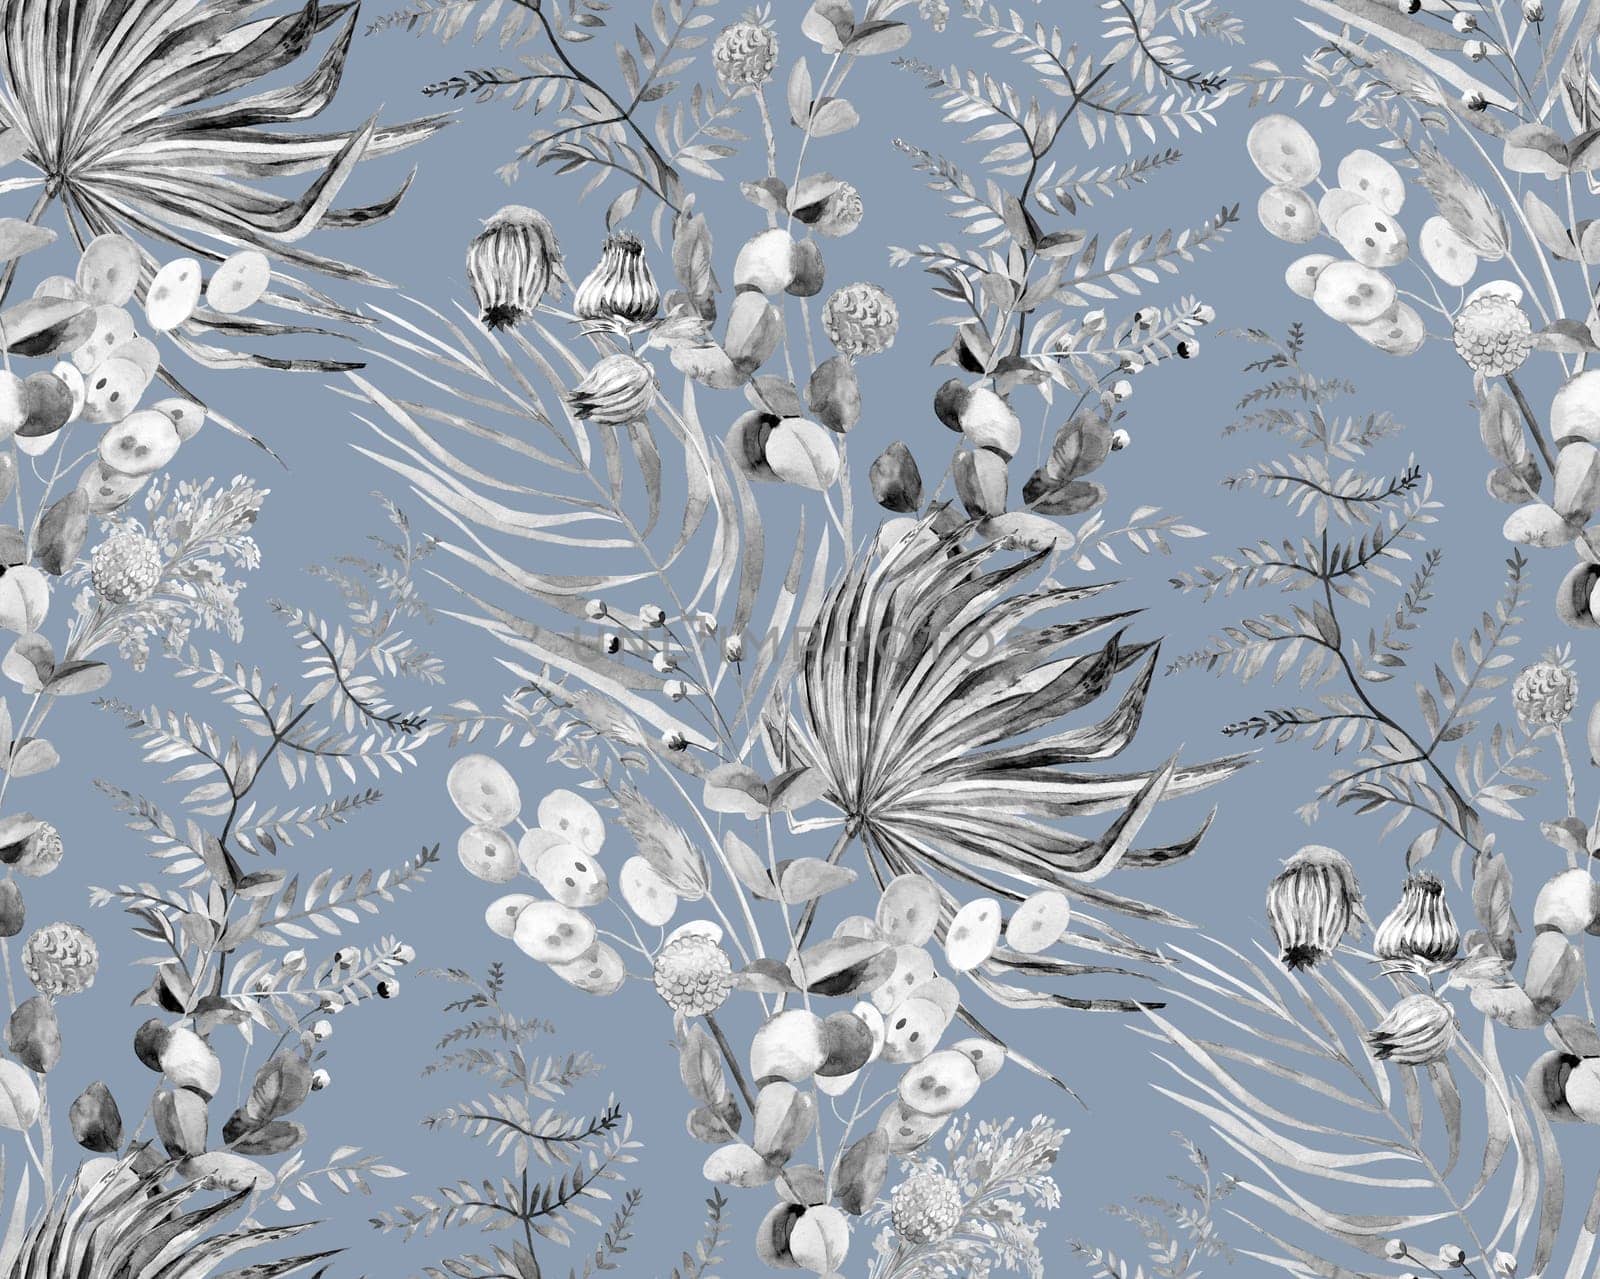 Seamless watercolor monochrome pattern with tropical palm leaves and herbs for textile